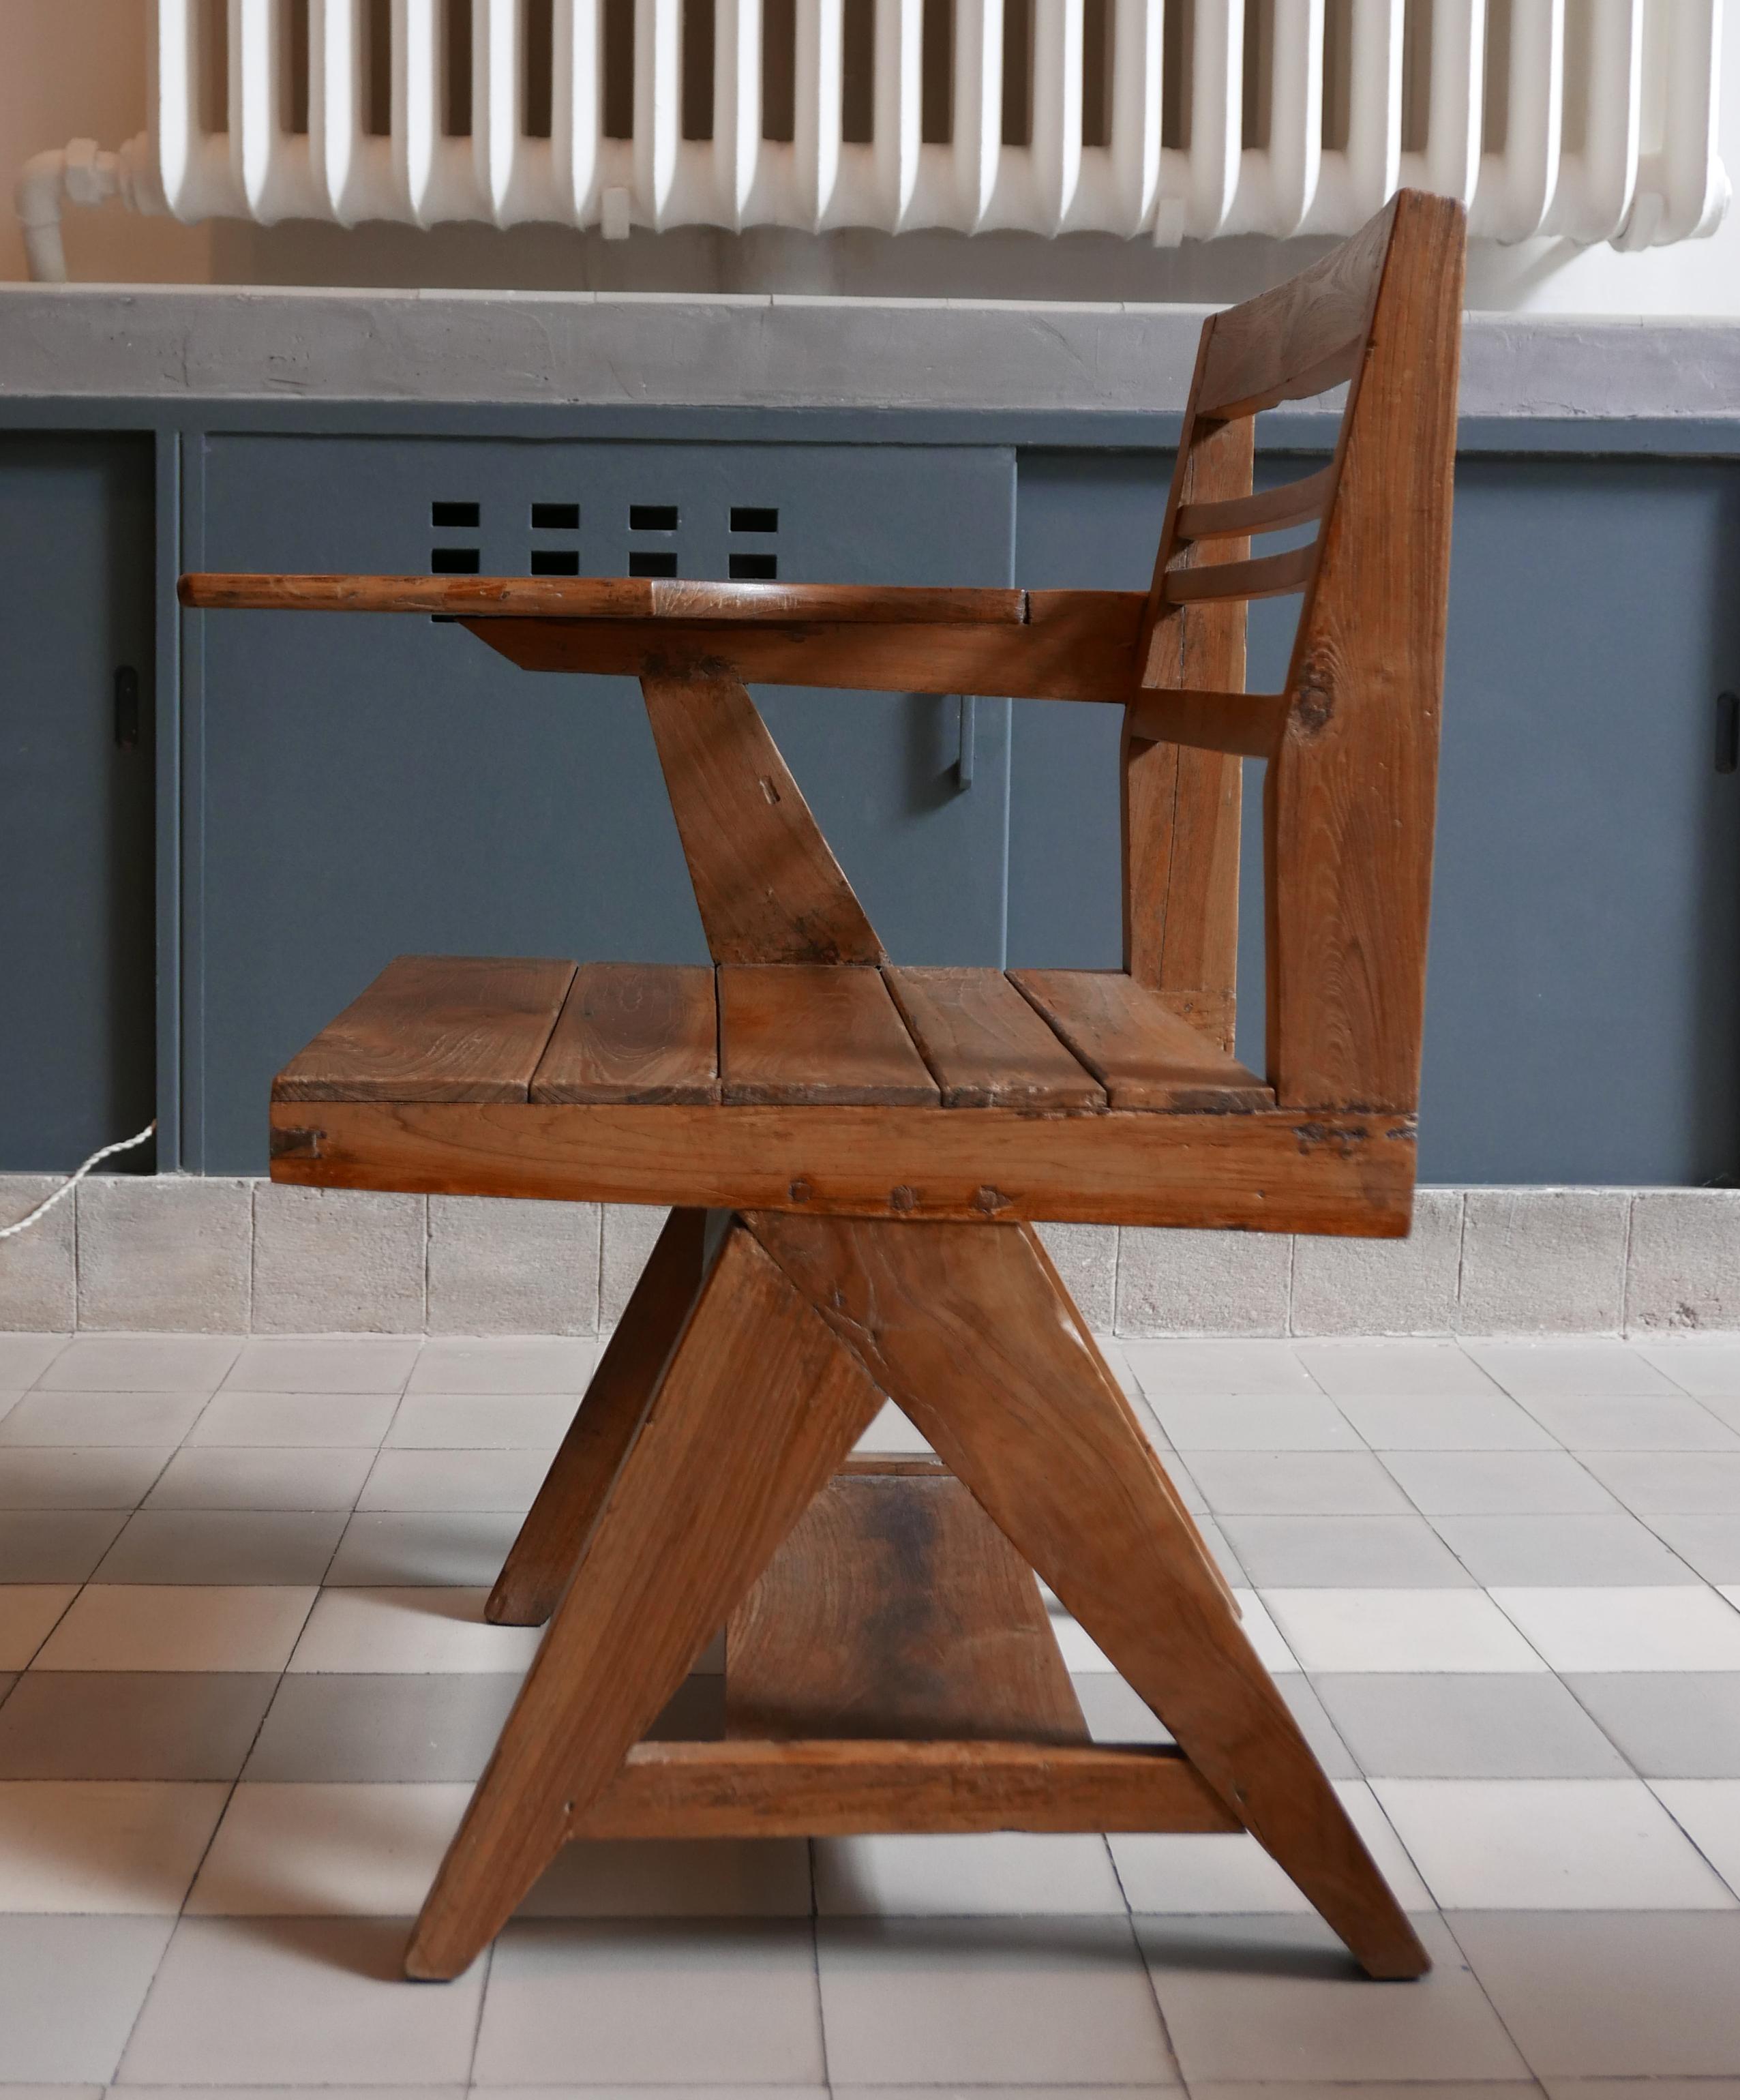 Pierre Jeanneret
PJ-SI-26-C
Writing chair, circa 1960
Version with seat and back with slats.
Solid teak.
Tablet under seat.
Chandigarh, India, Punjab University.